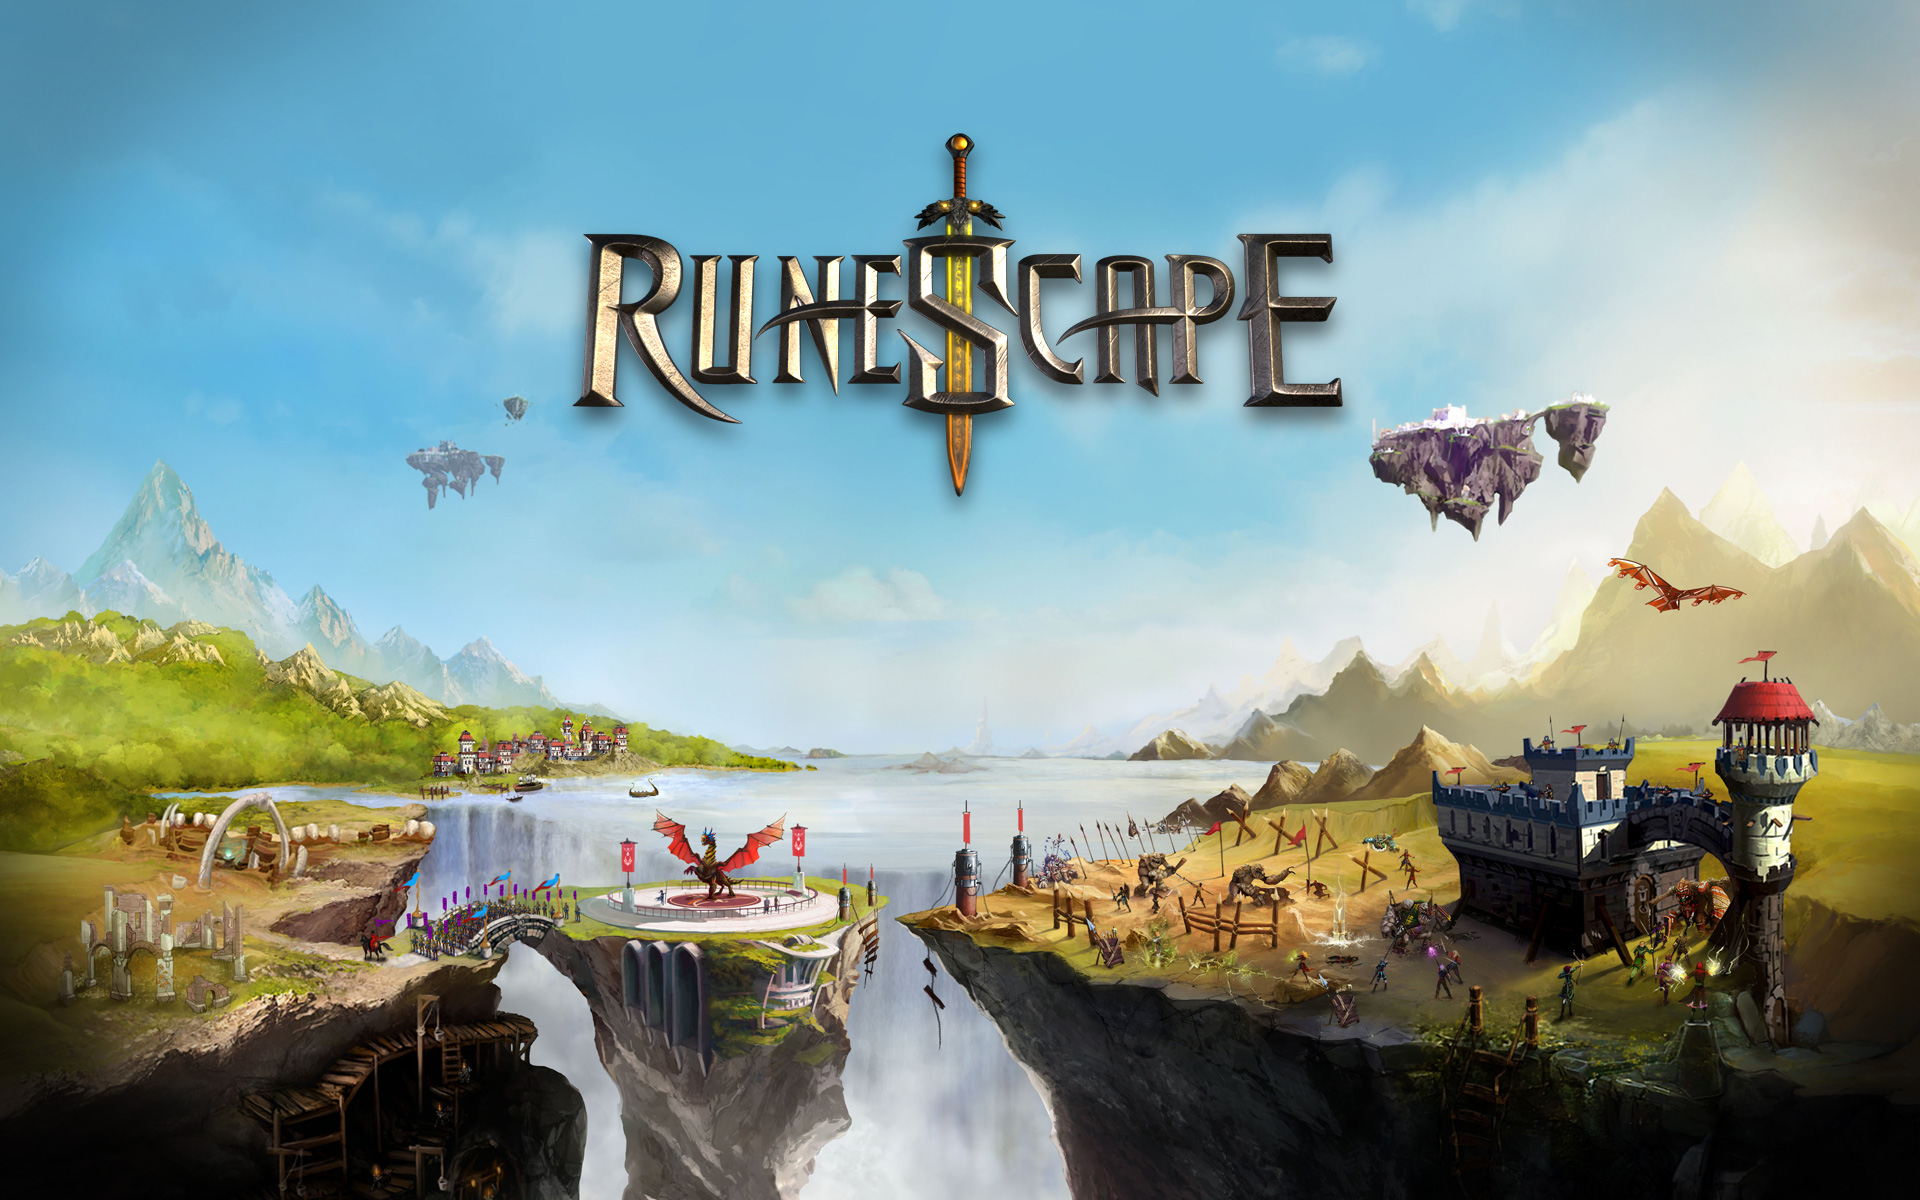 How the Runescape became the world's most popular game